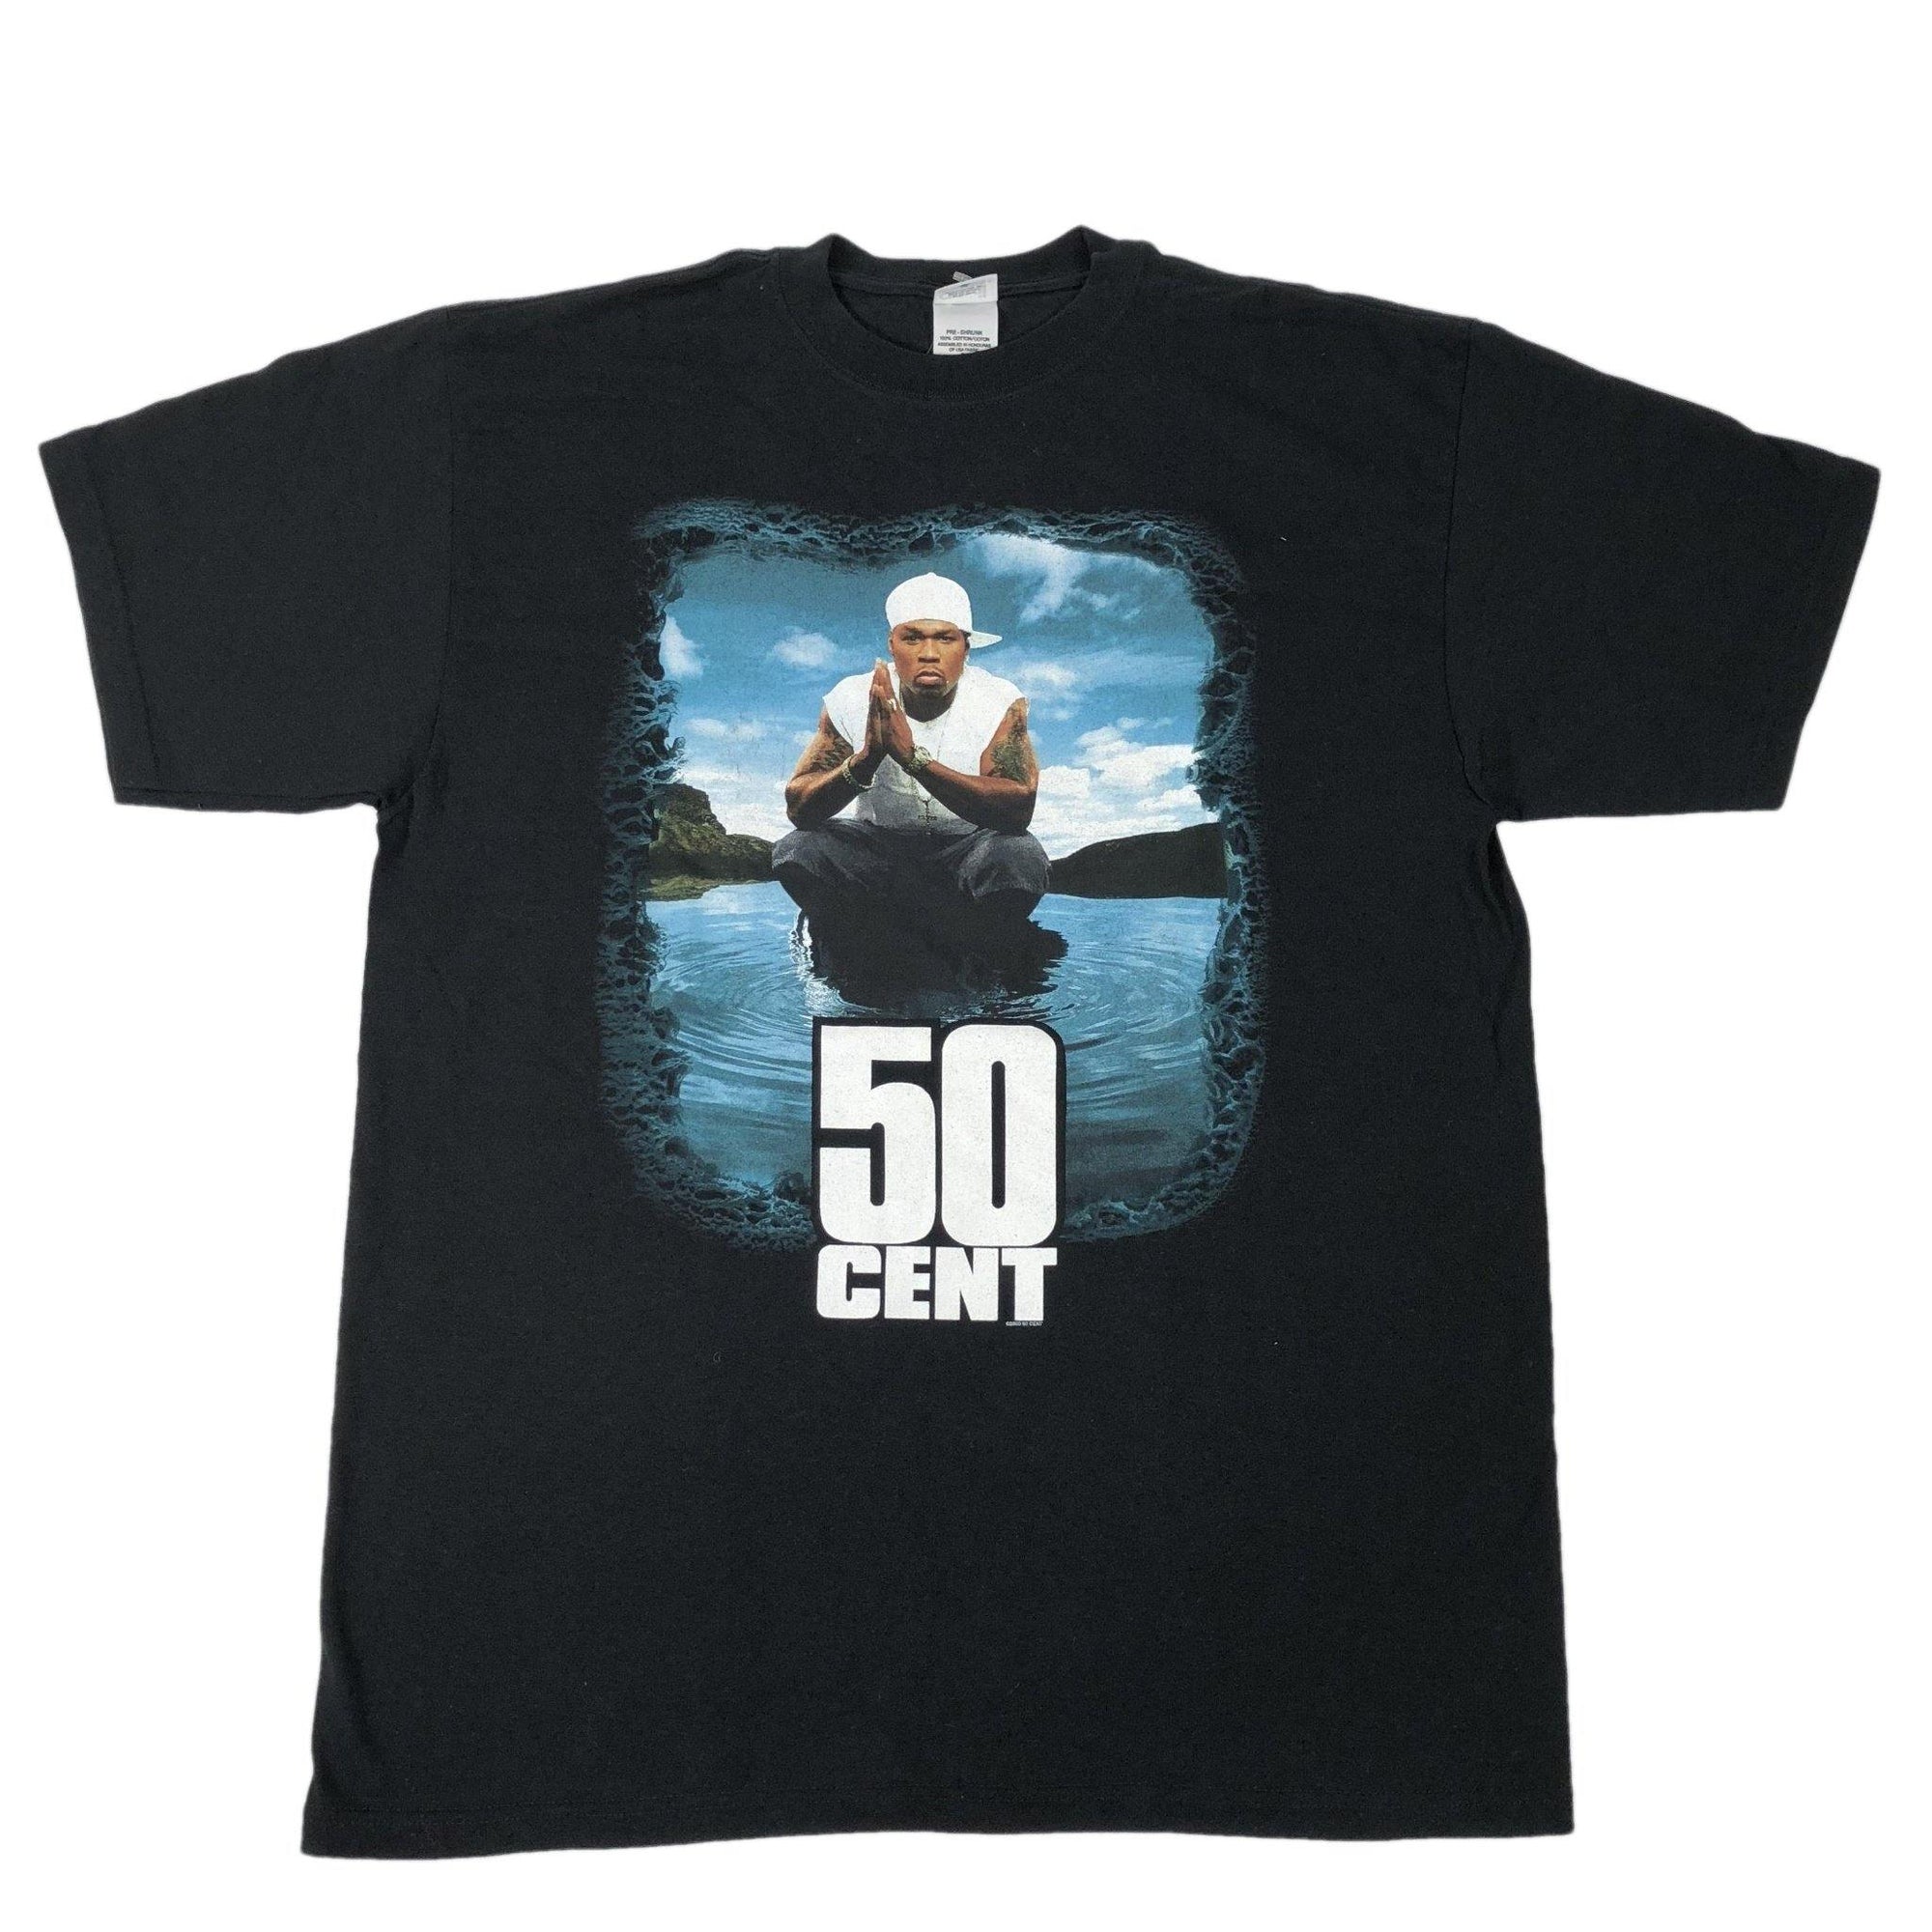 Vintage 50 Cent "In a Lake" T-Shirt - jointcustodydc